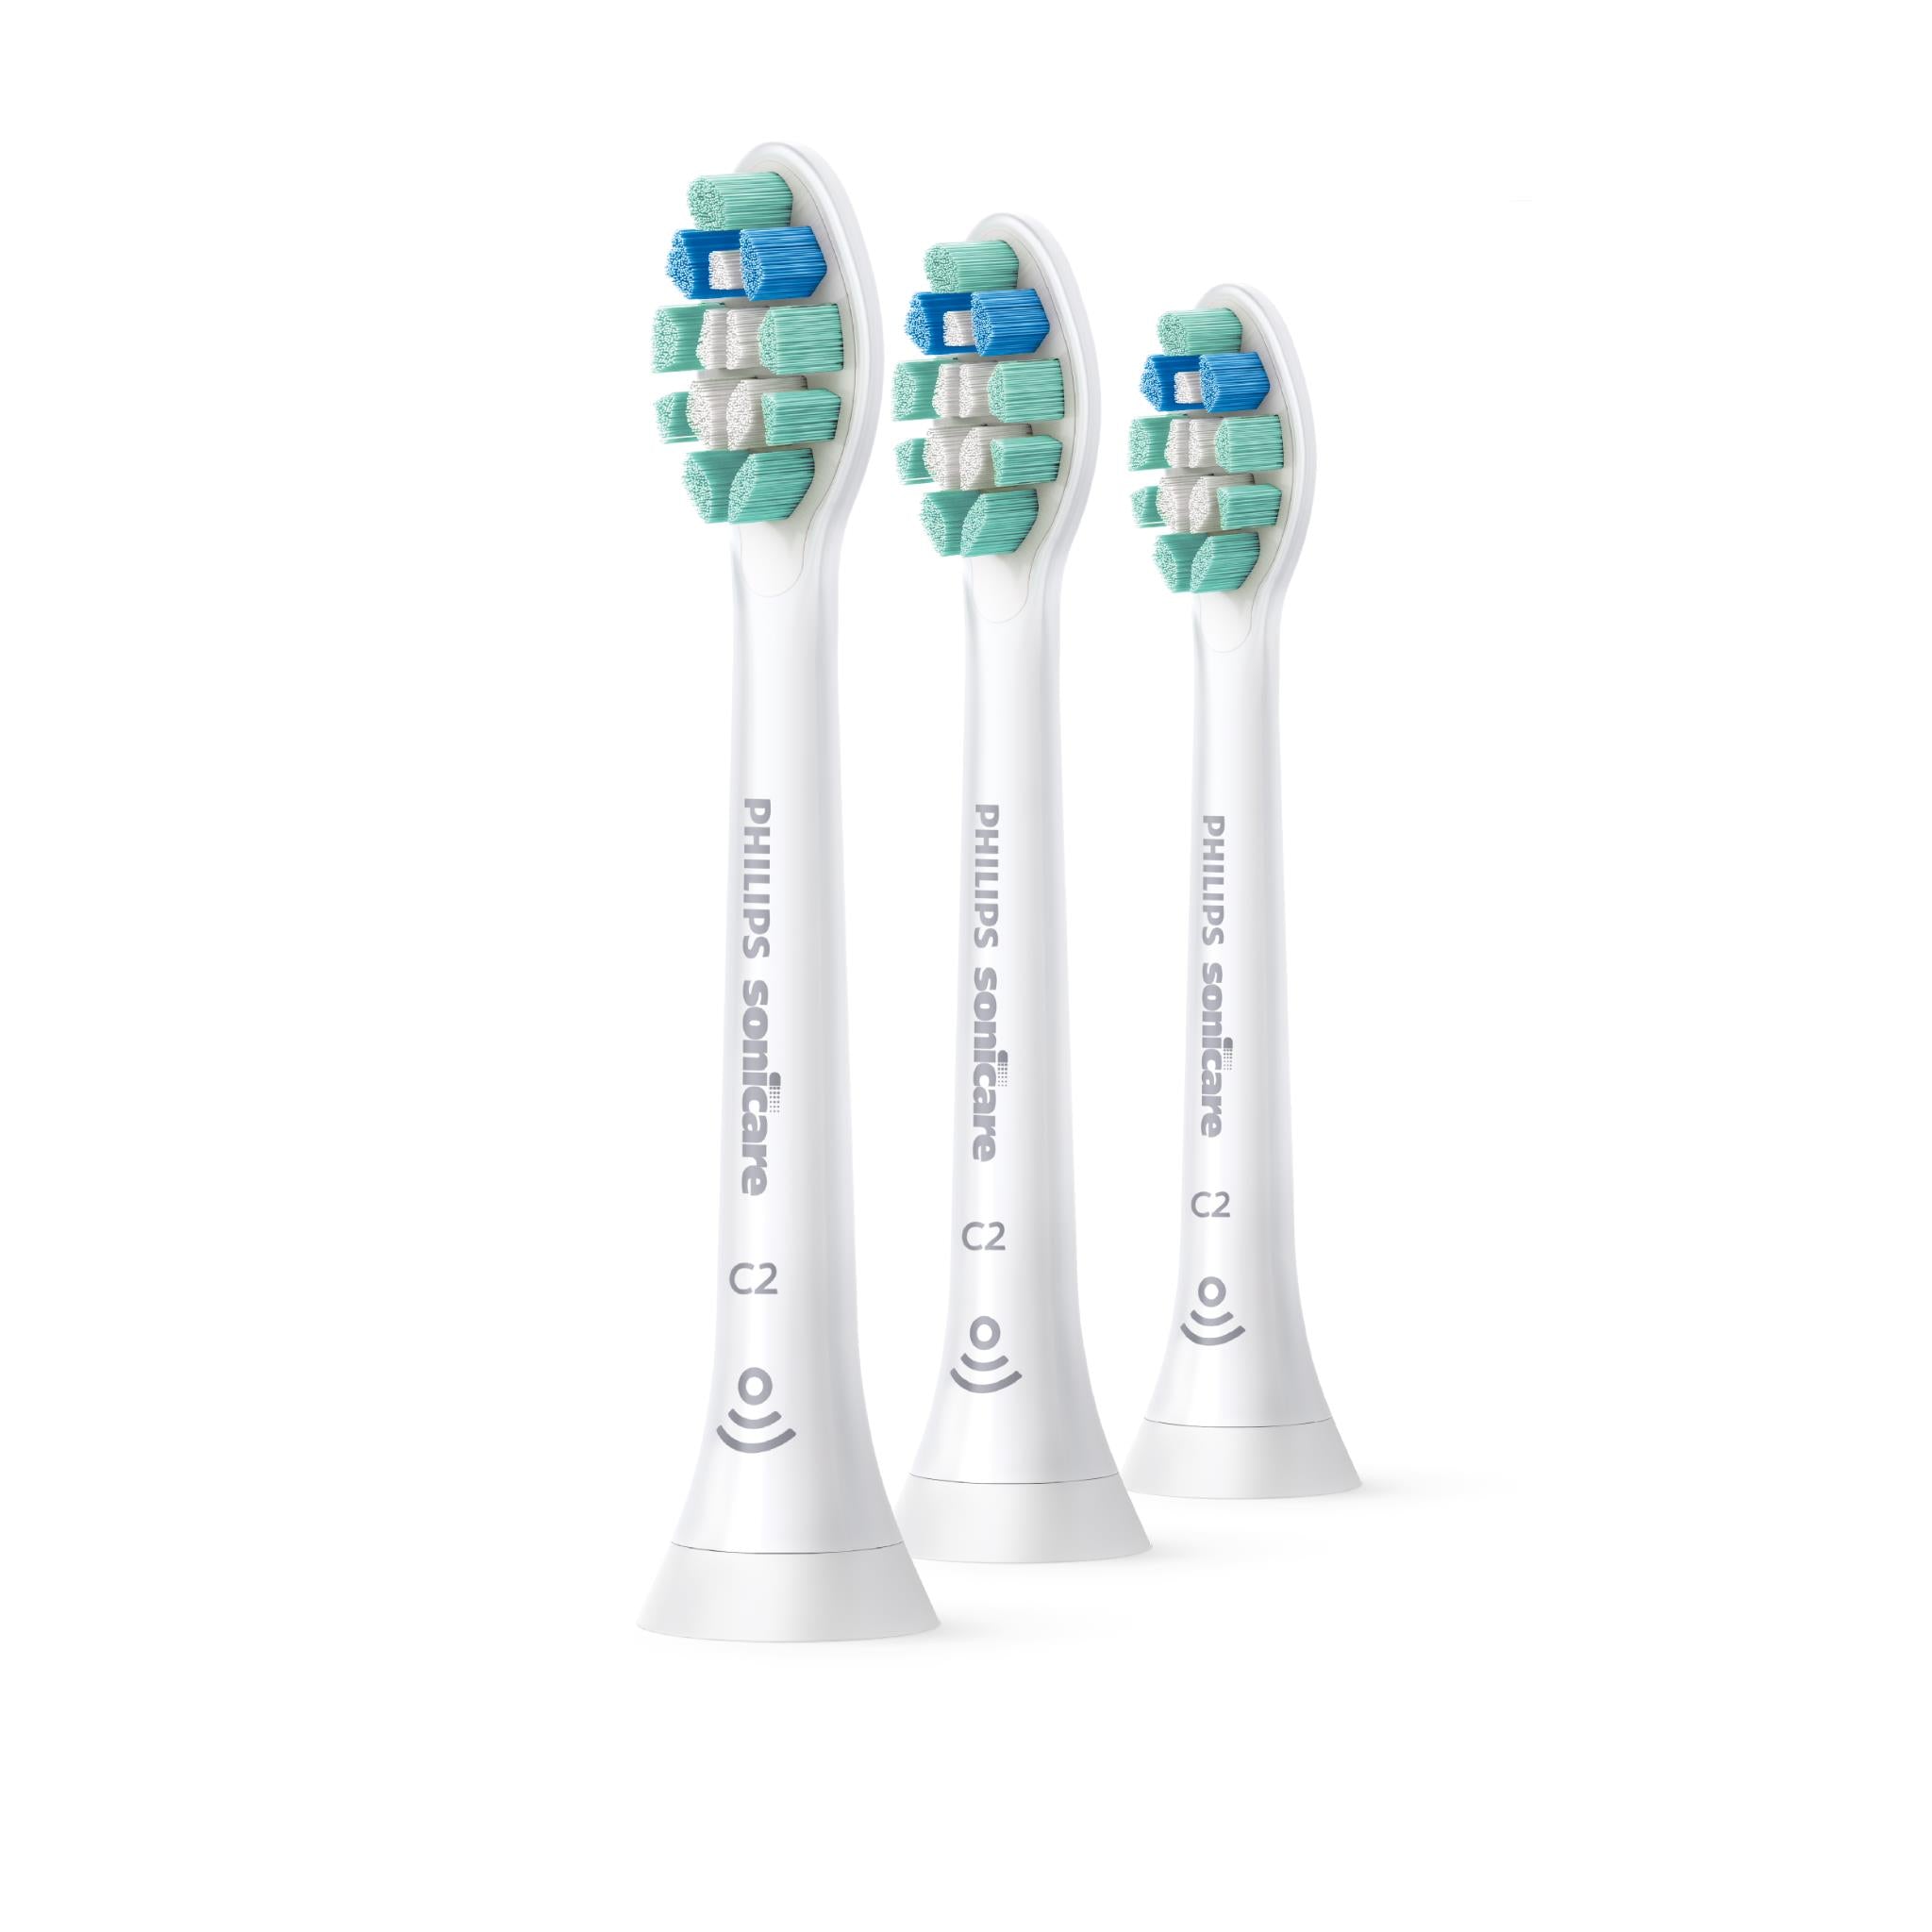 philips sonicare optimal plaque defence replacement brush heads (3 pack)